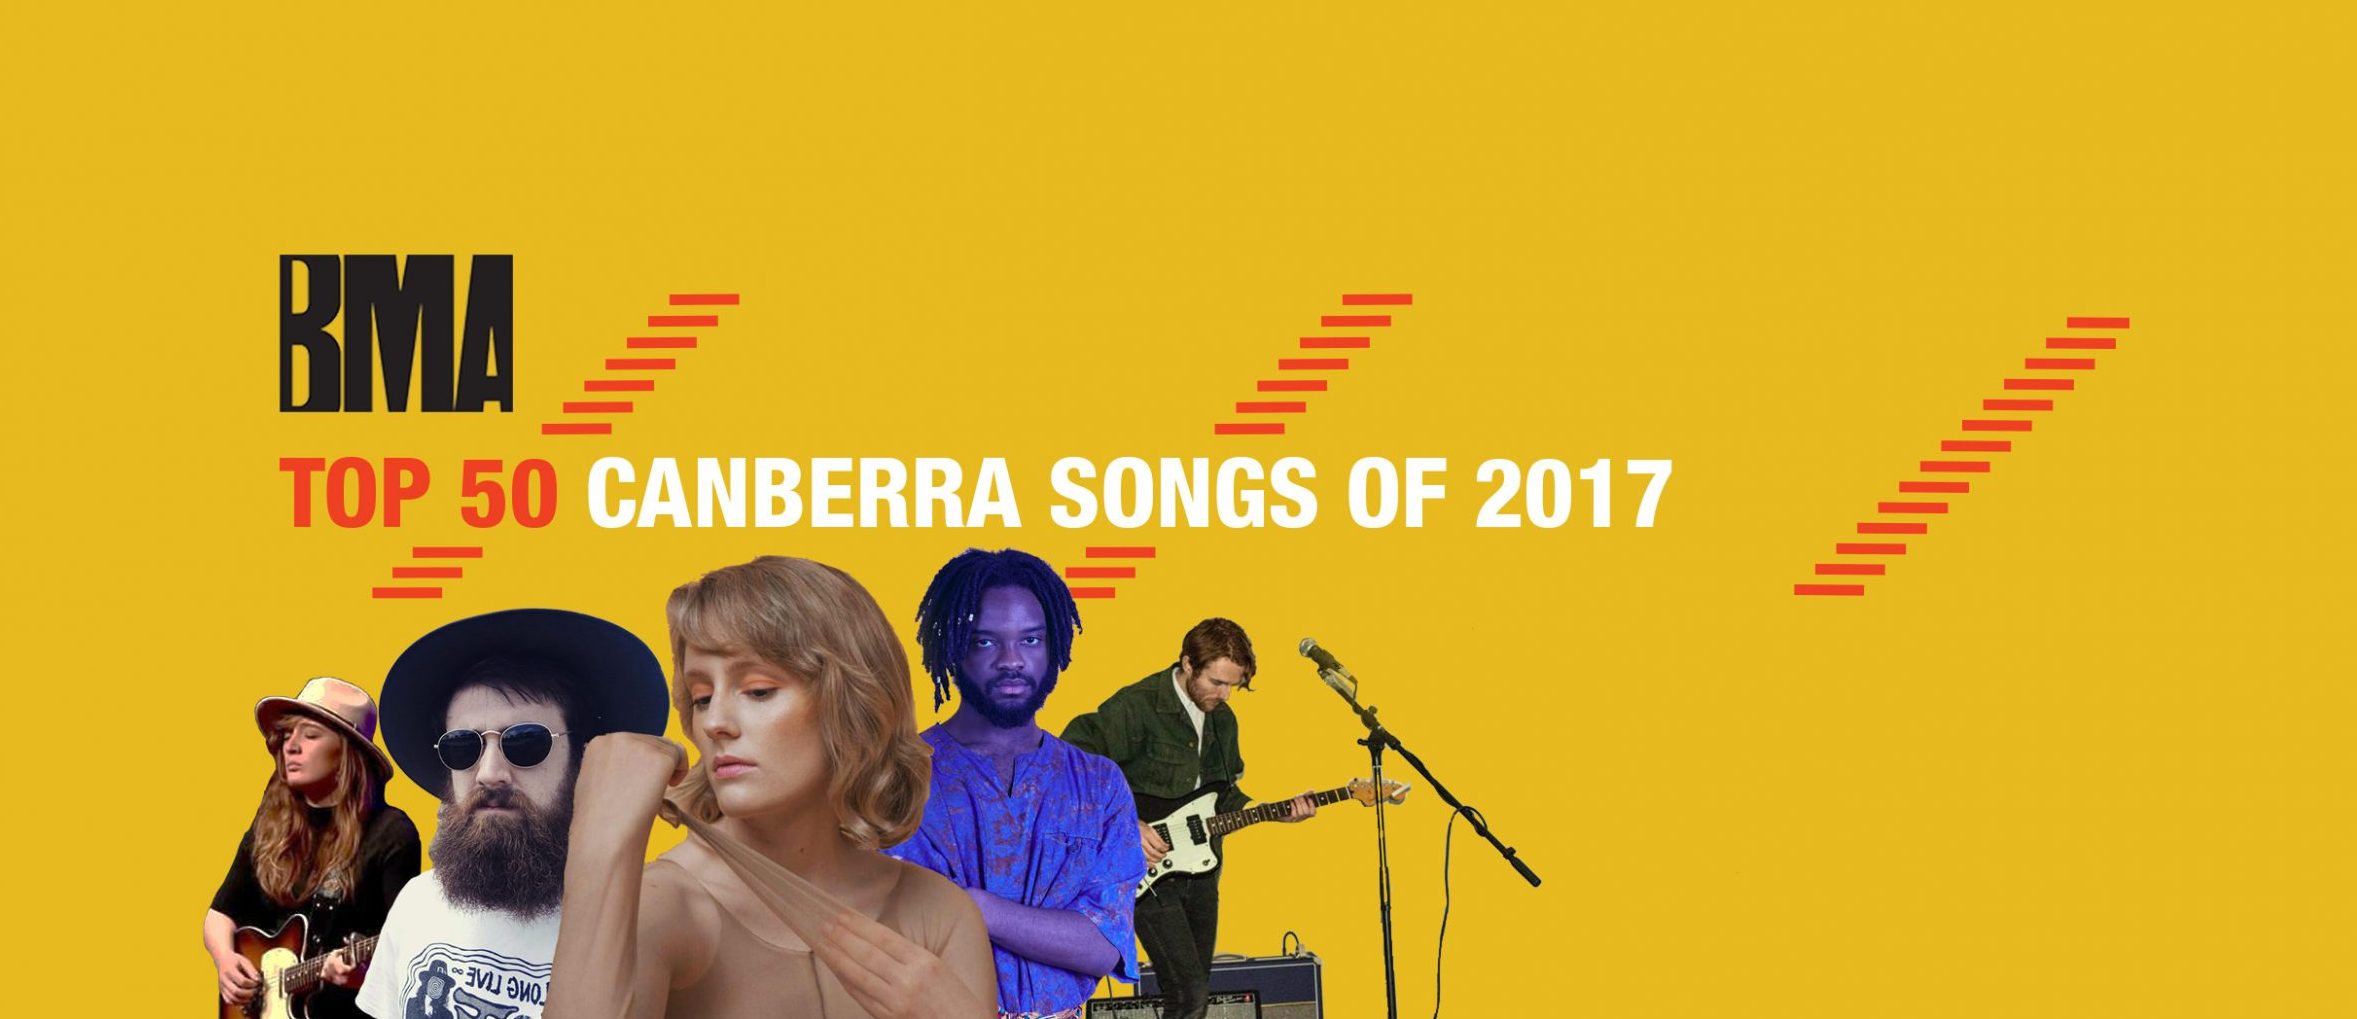 BMA's Top 50 Canberra Songs Of 2017